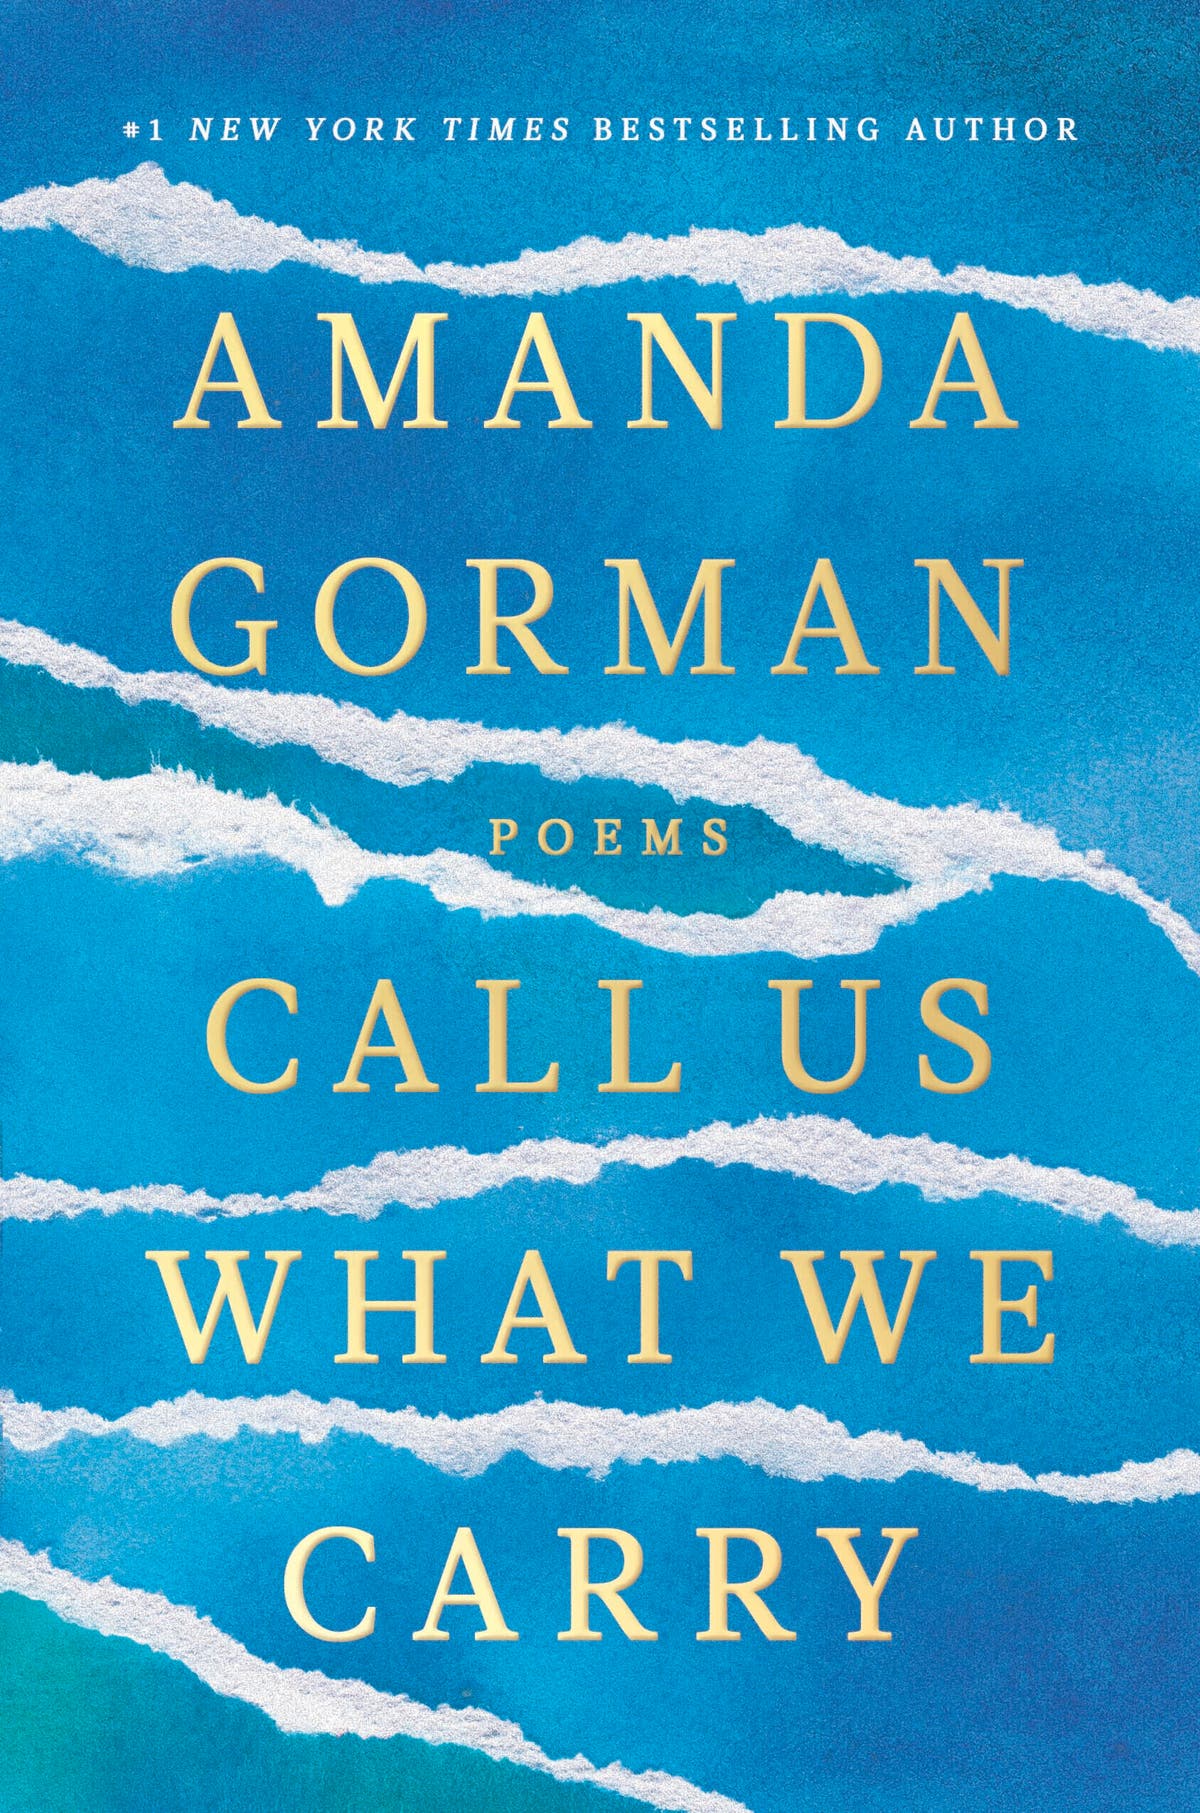 Resensie: Amanda Gorman offers the inventive 'Lexicon of Hope'